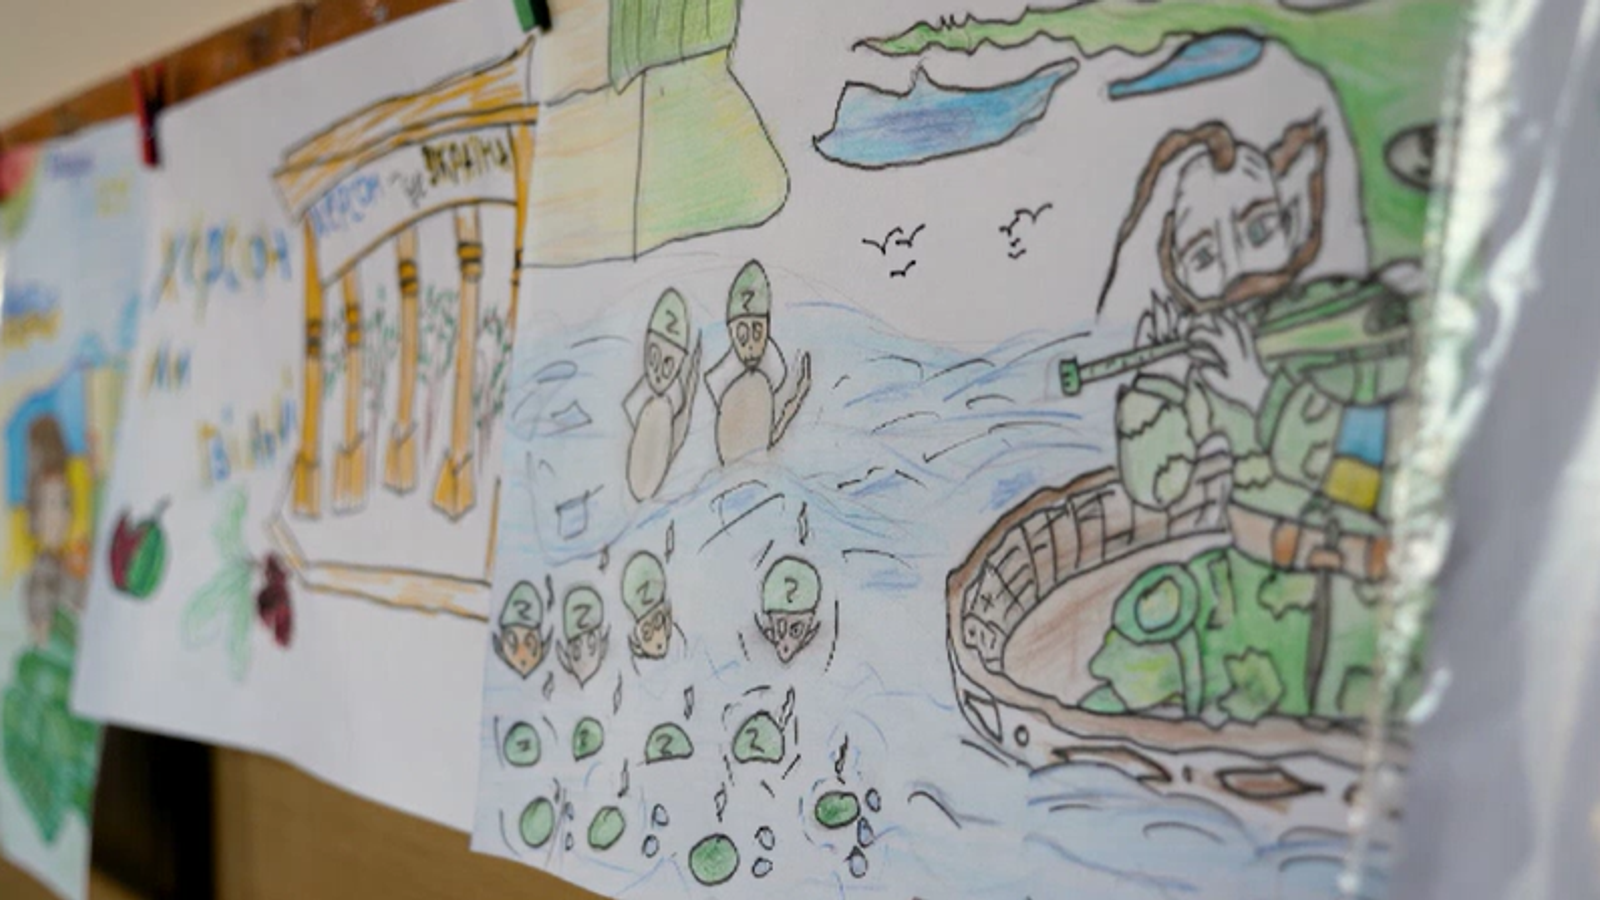 A lost childhood: Inside the Ukrainian school shut by war where children's drawings of the conflict line the walls